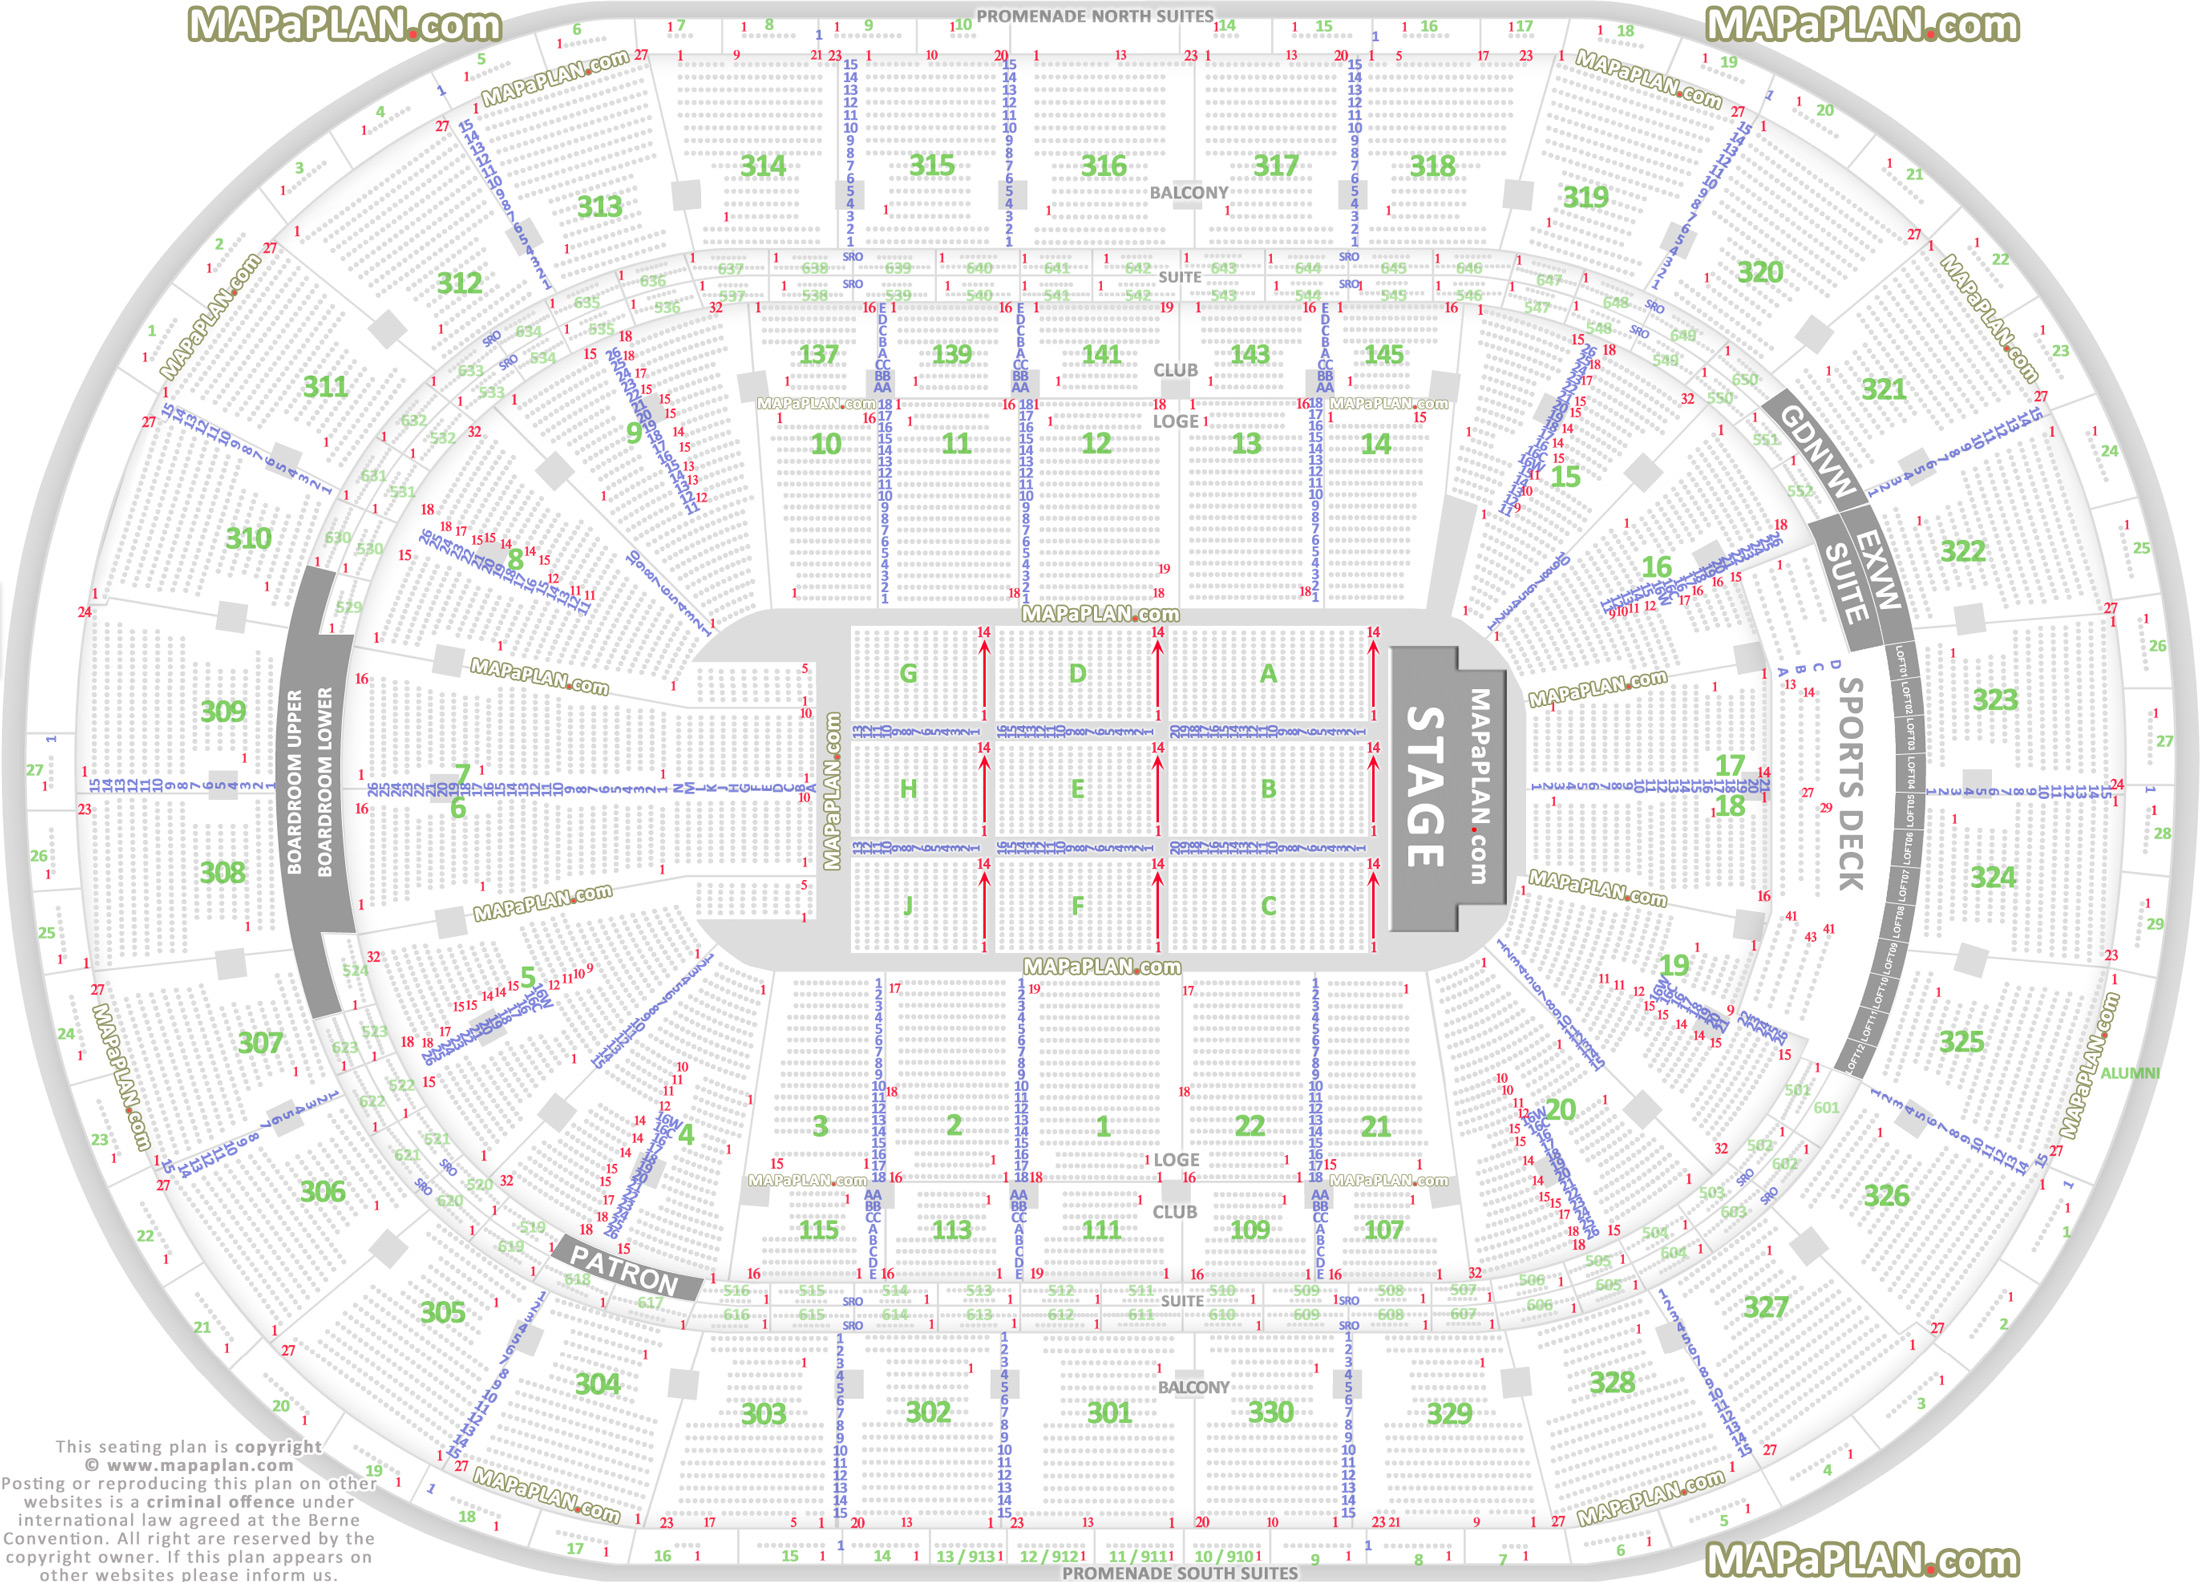 Madison Square Garden Concert Seating Chart Seat amulette